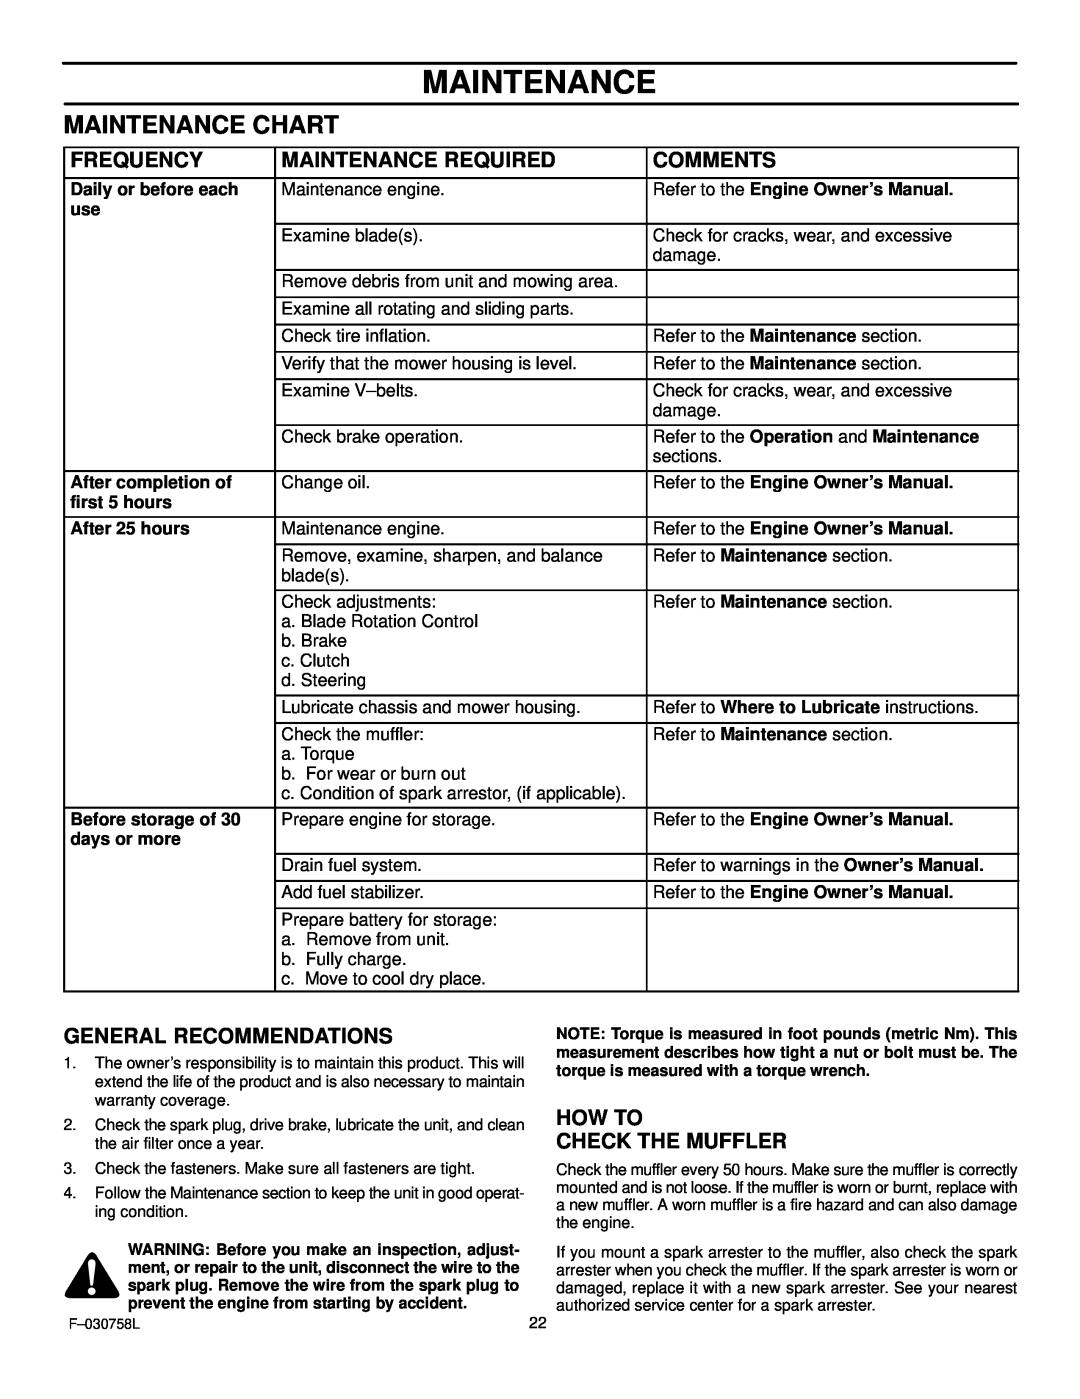 Murray 465609x24A manual Maintenance Chart, Frequency, Maintenance Required, Comments, General Recommendations 